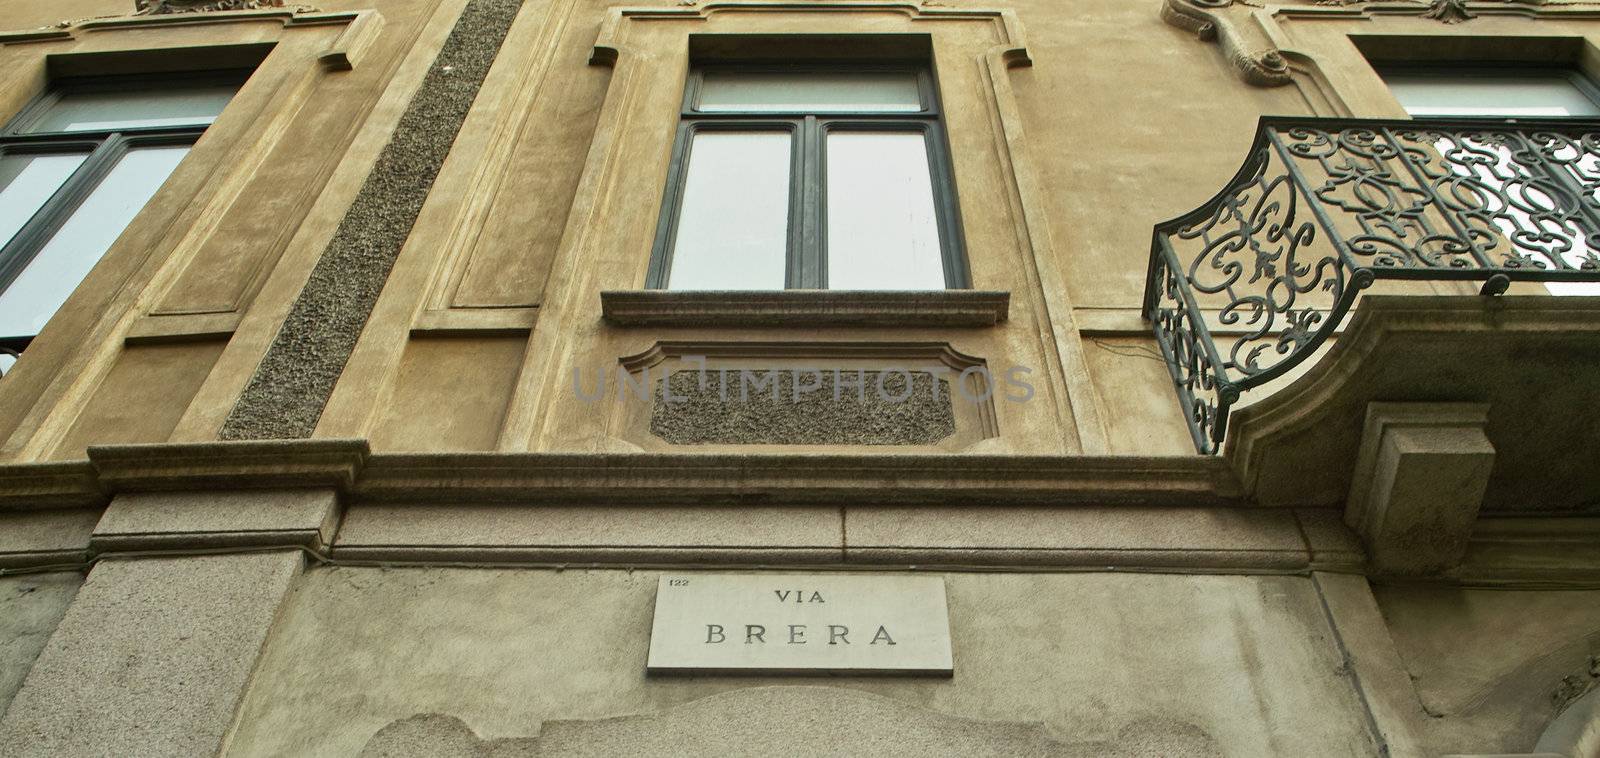 Brera is the famous street of fashion